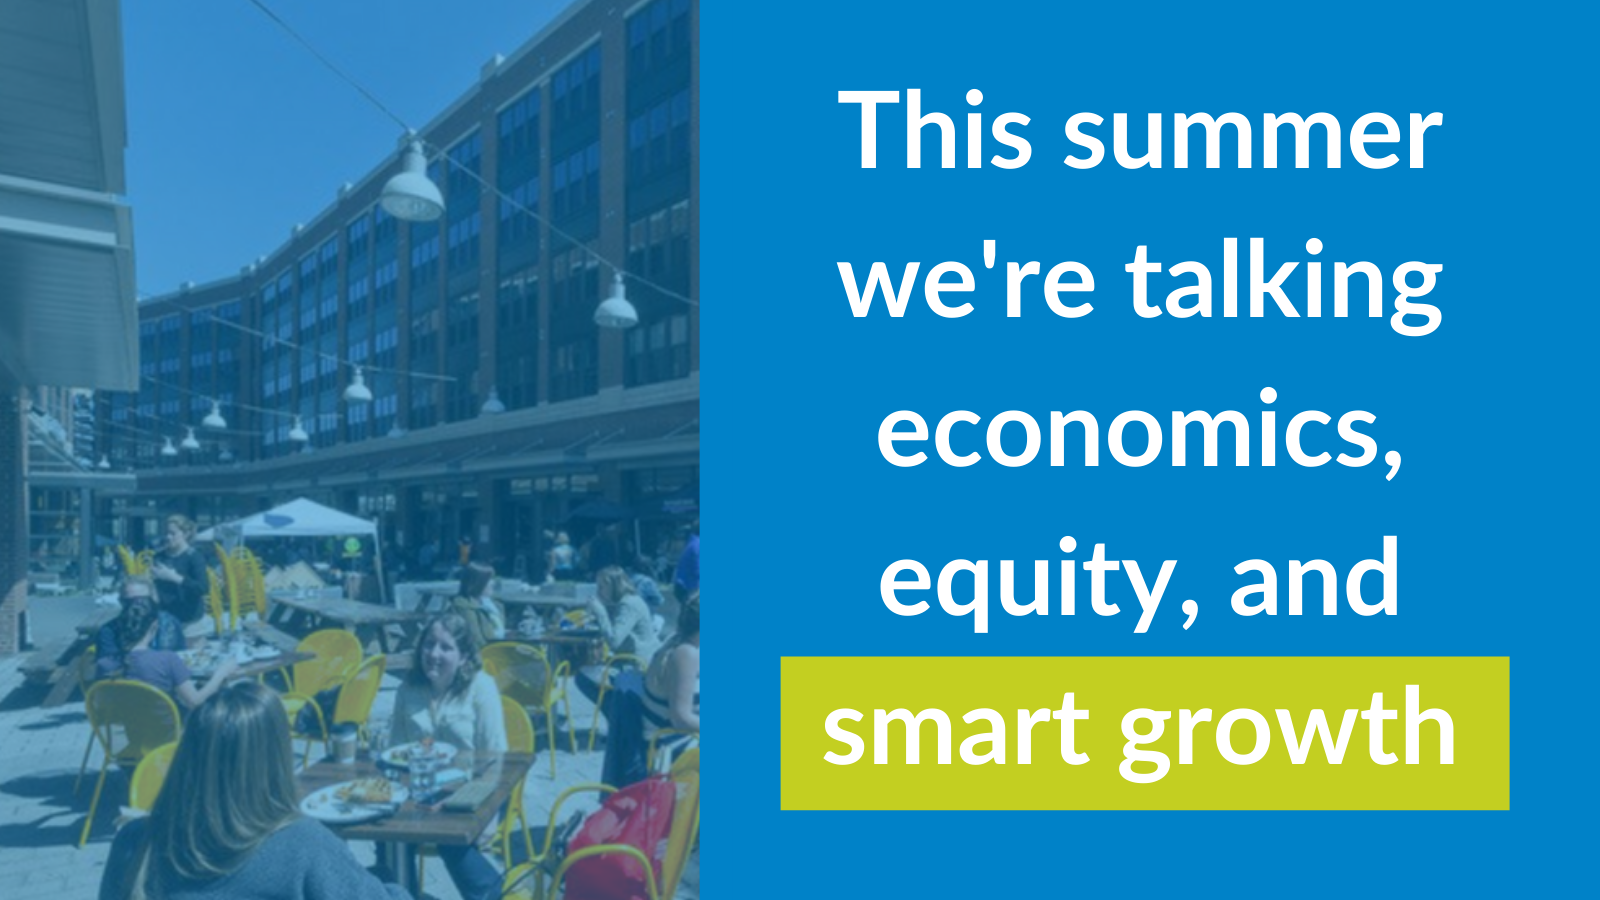 This summer: Talking economics, equity, and smart growth